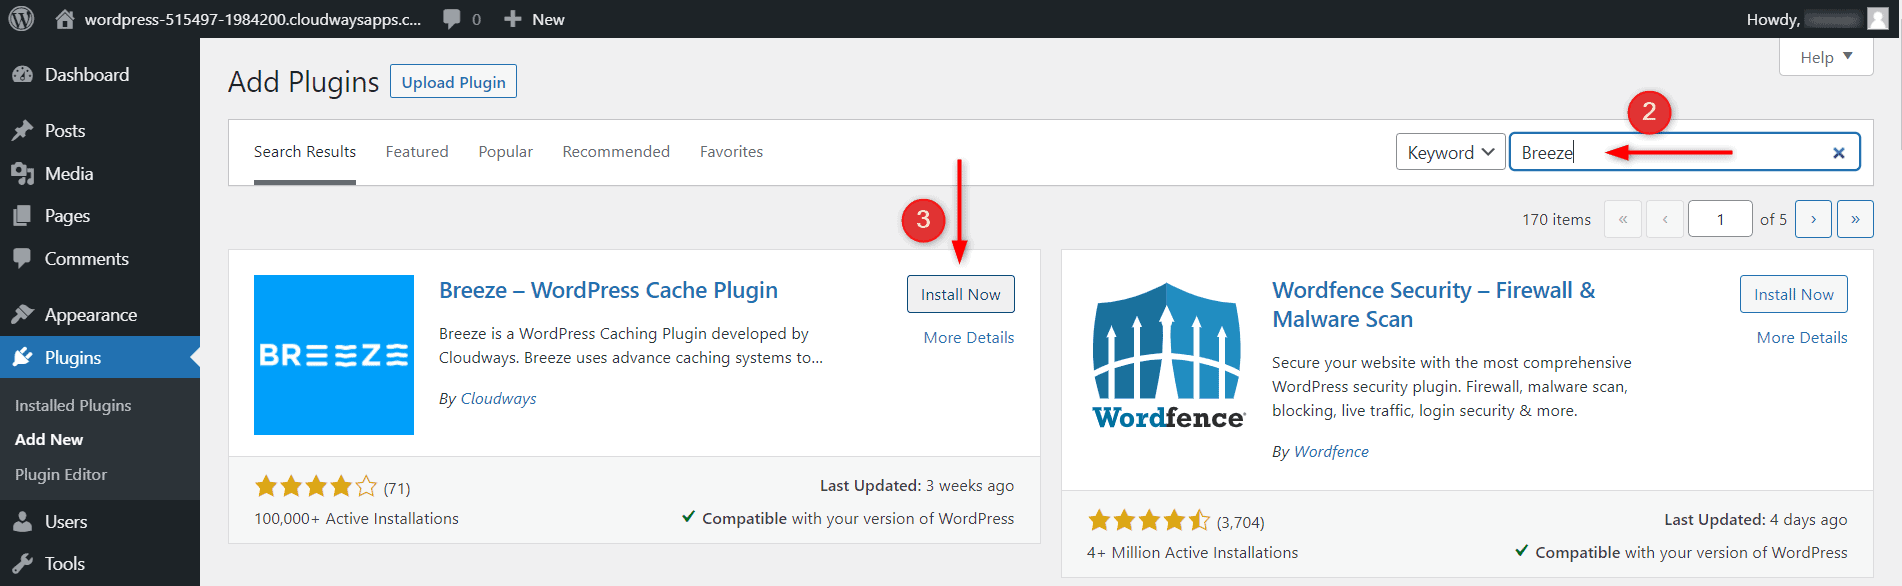 How To Install And Configure Breeze WordPress Cache Plugin : Search for Breeze